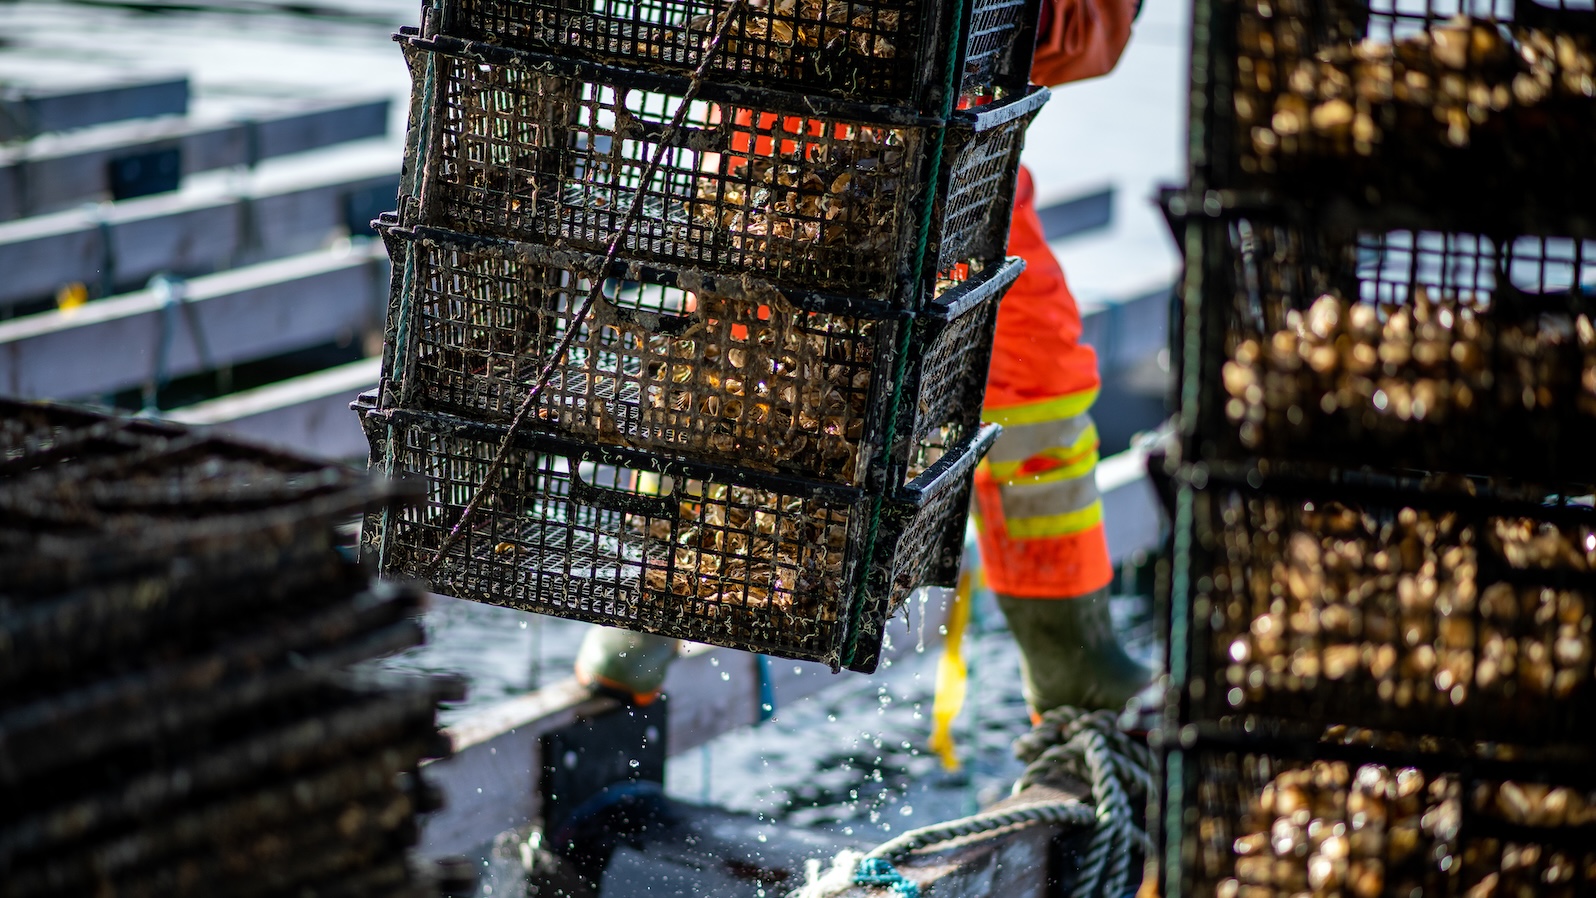 A fisherman, wearing reflective gear and visible from the waist down, lifts several crates containing oysters